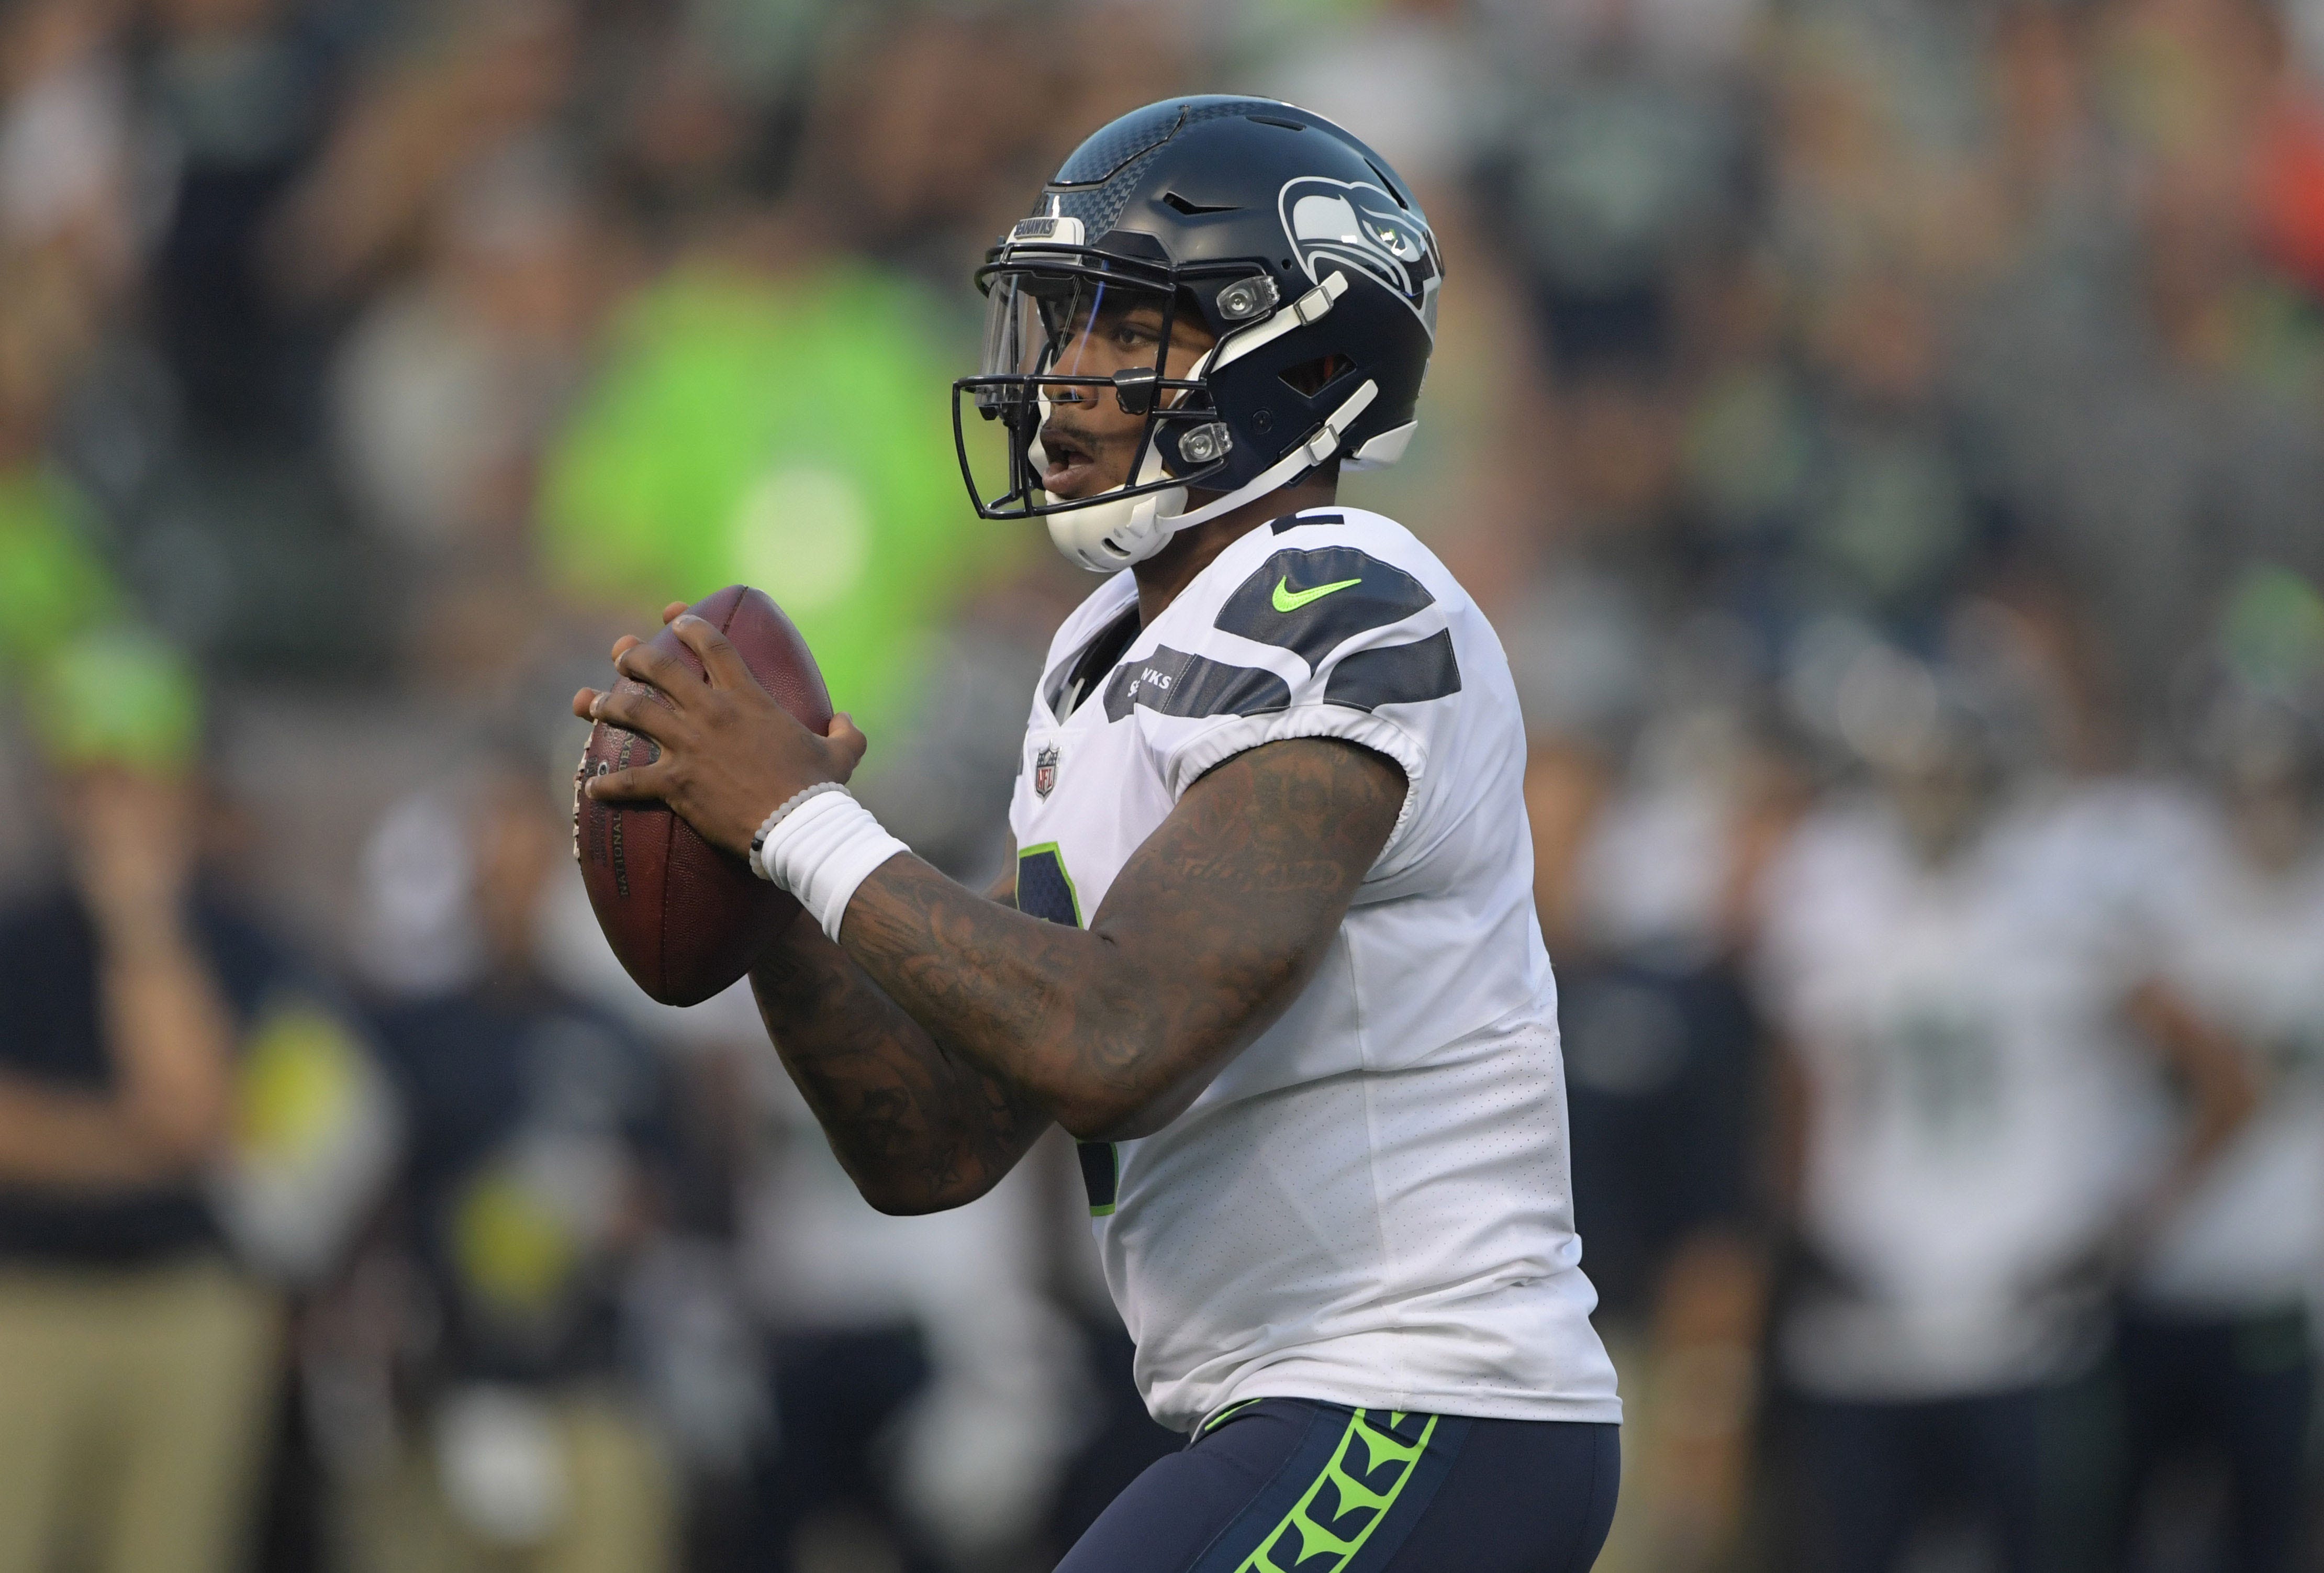 Ex-Seahawks quarterback Trevone Boykin charged in March attack